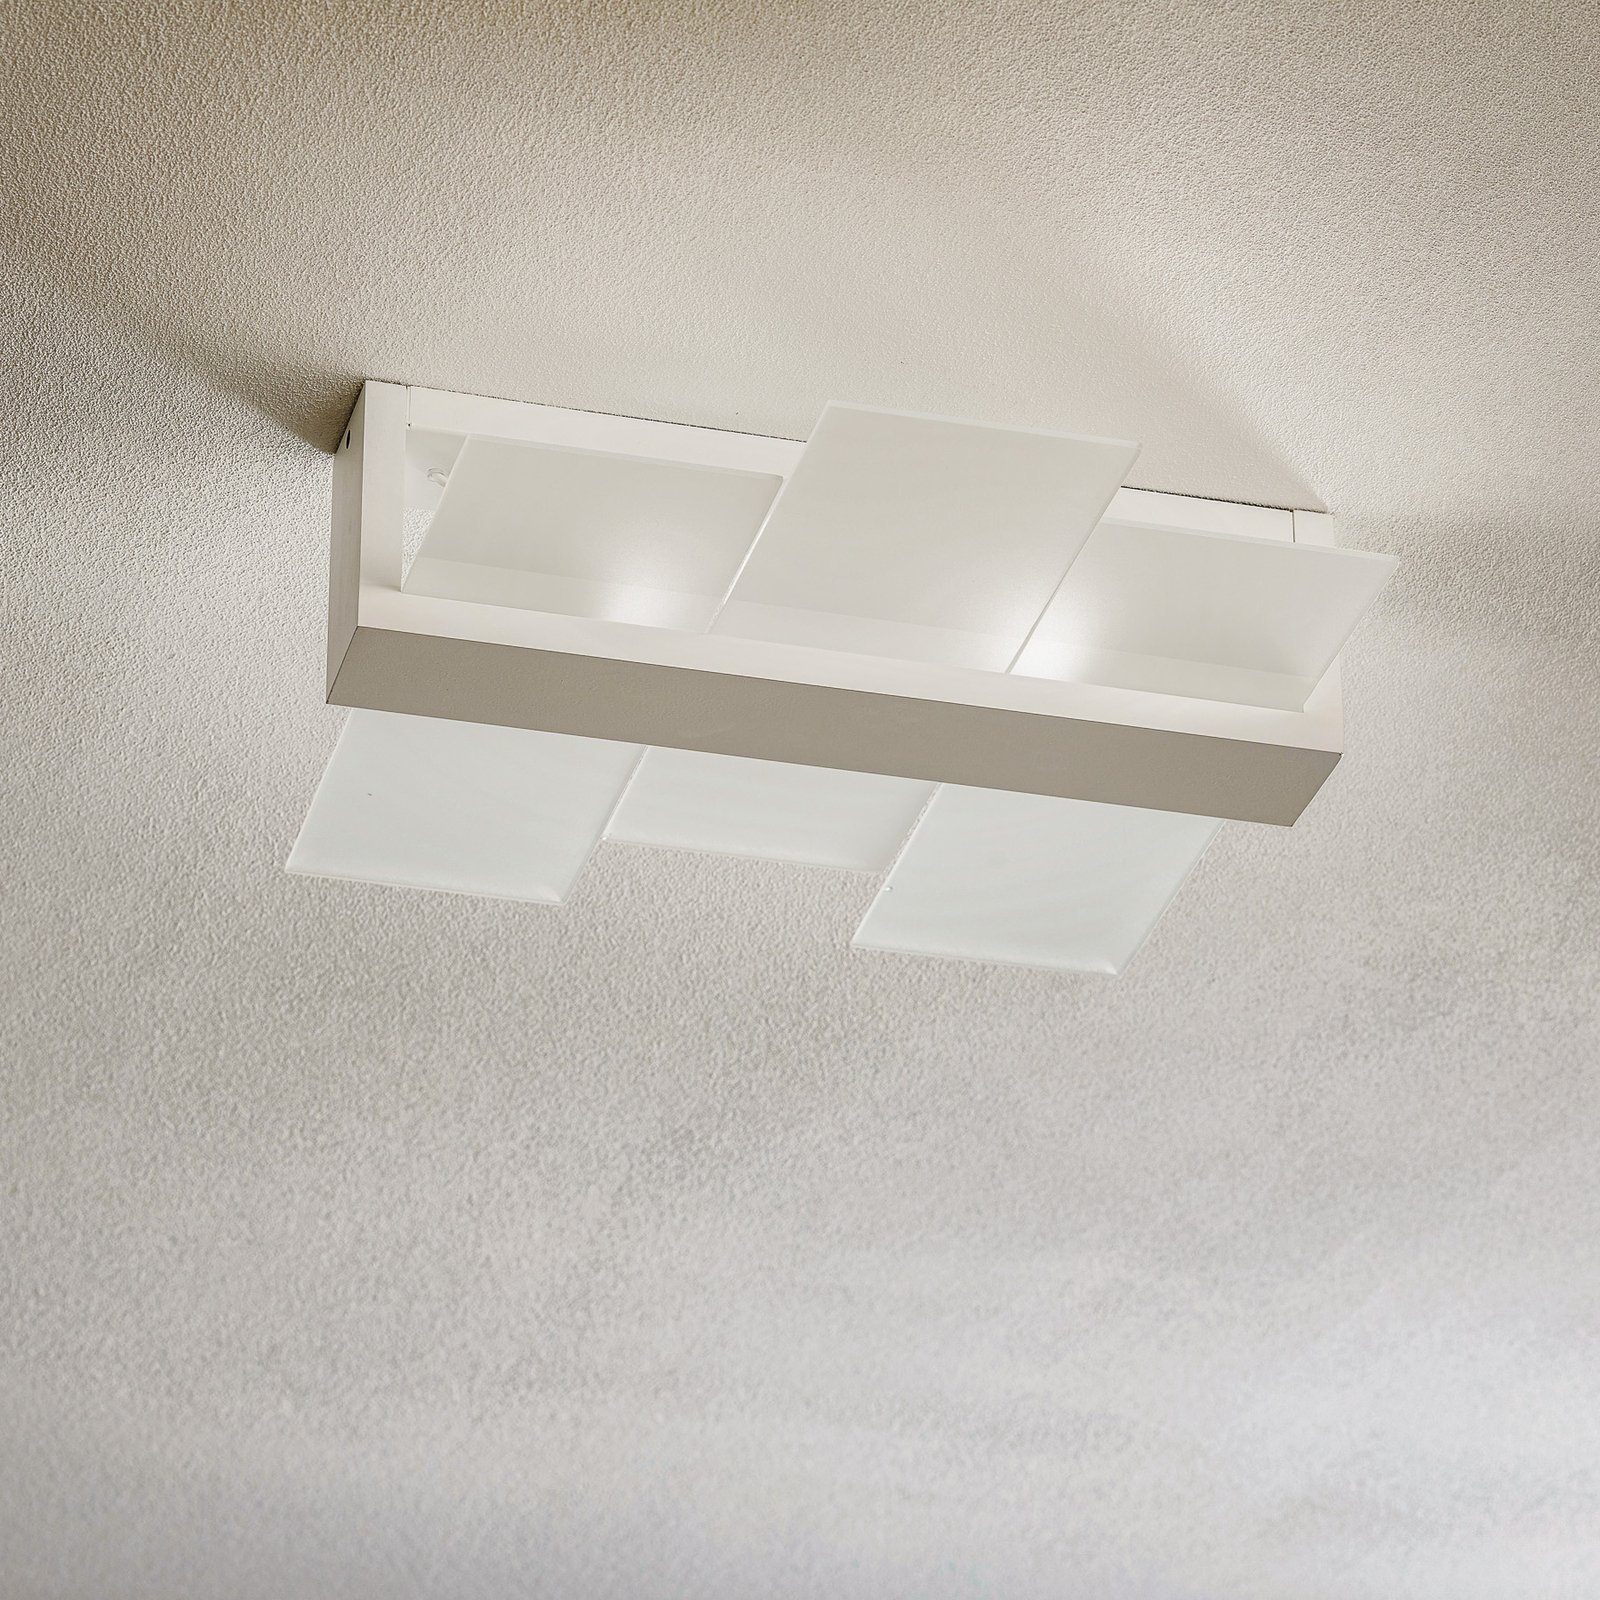 Shifted 2 ceiling light, glass, white